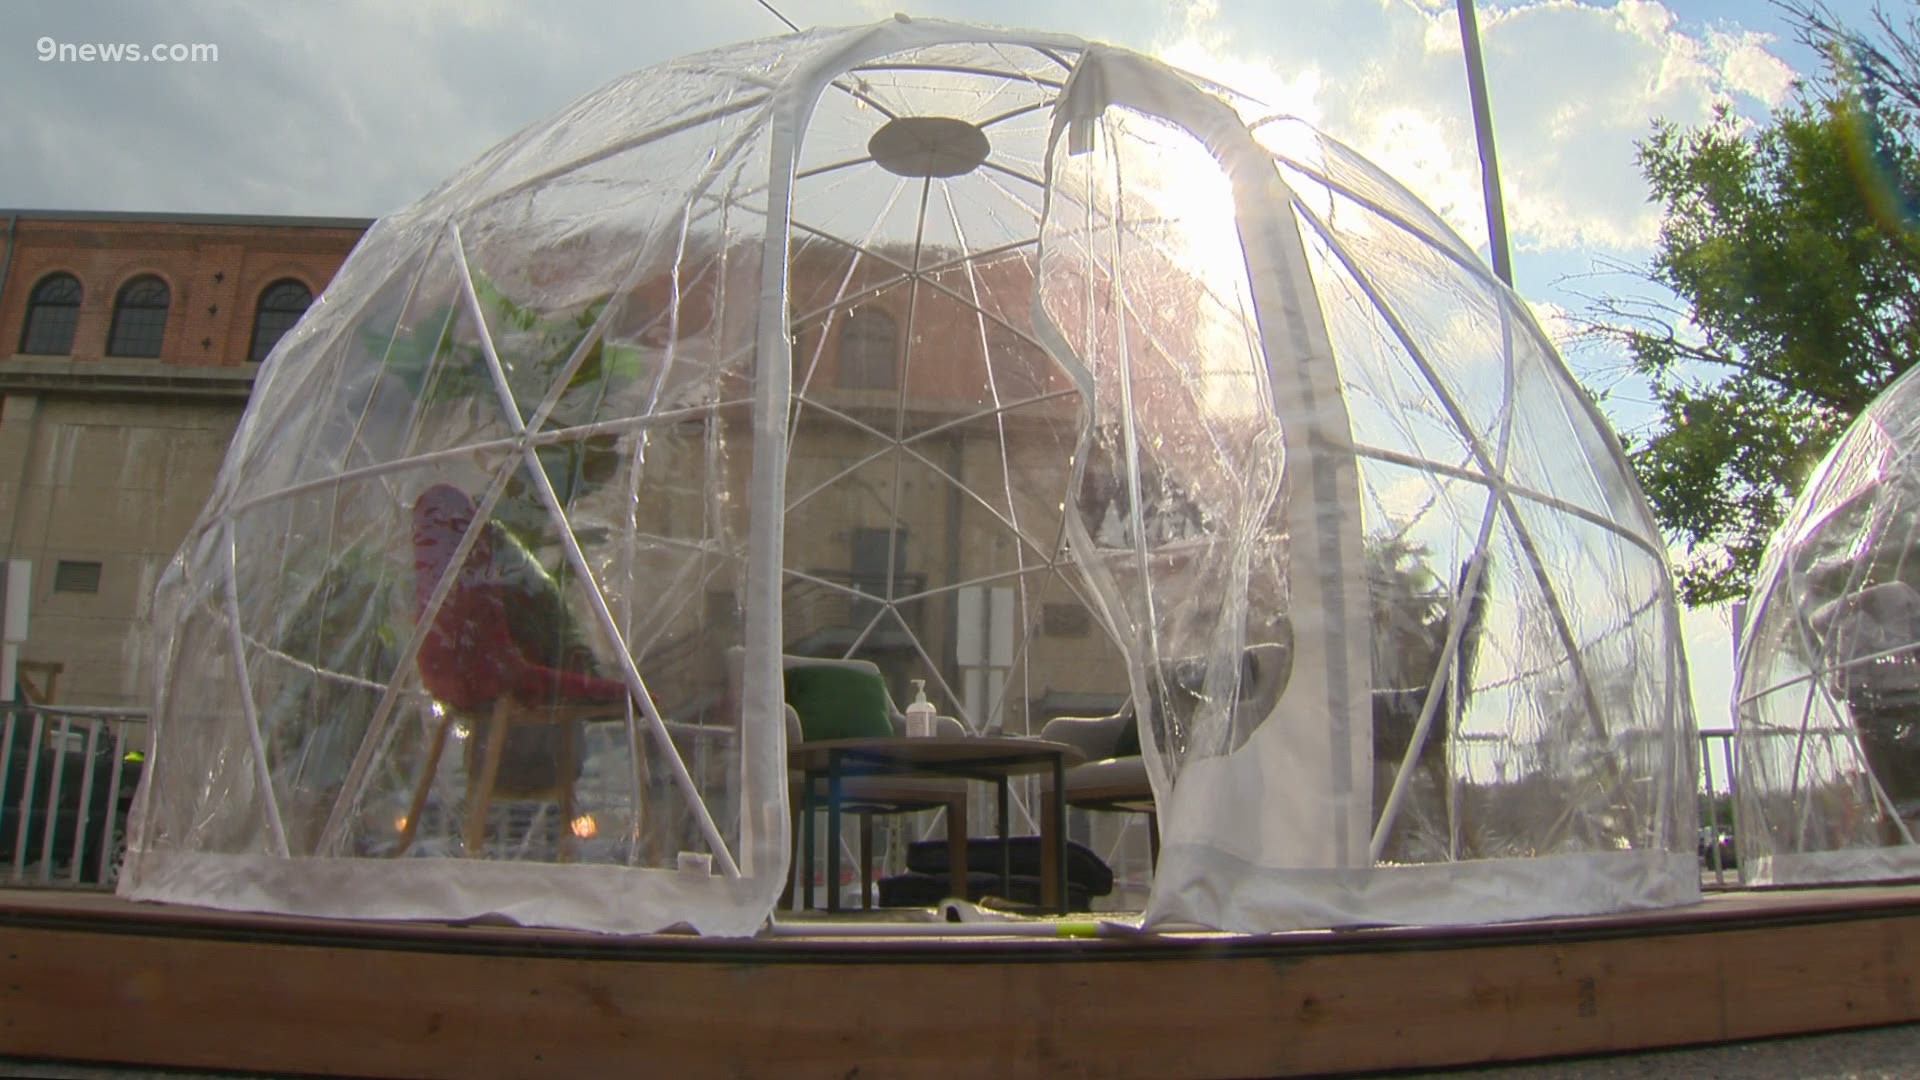 Some restaurants are getting creative to keep their outdoor dining customers warm when temperatures start to drop.